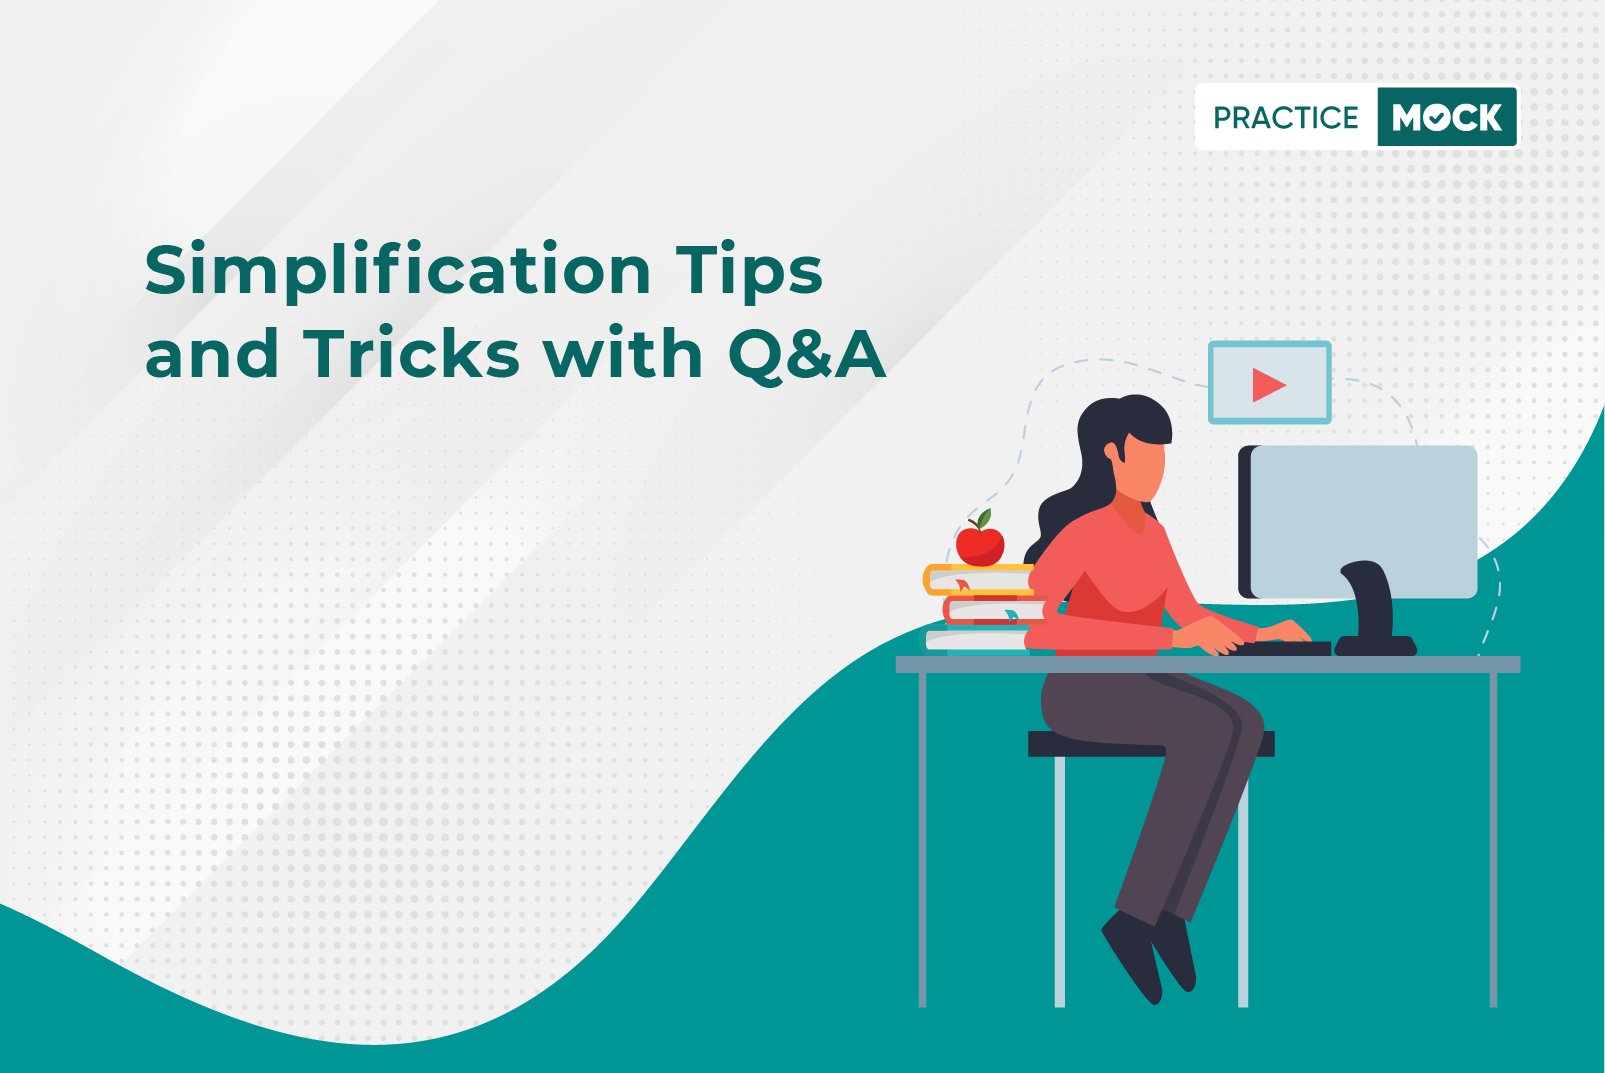 Simplification Tips and Tricks with Q&A